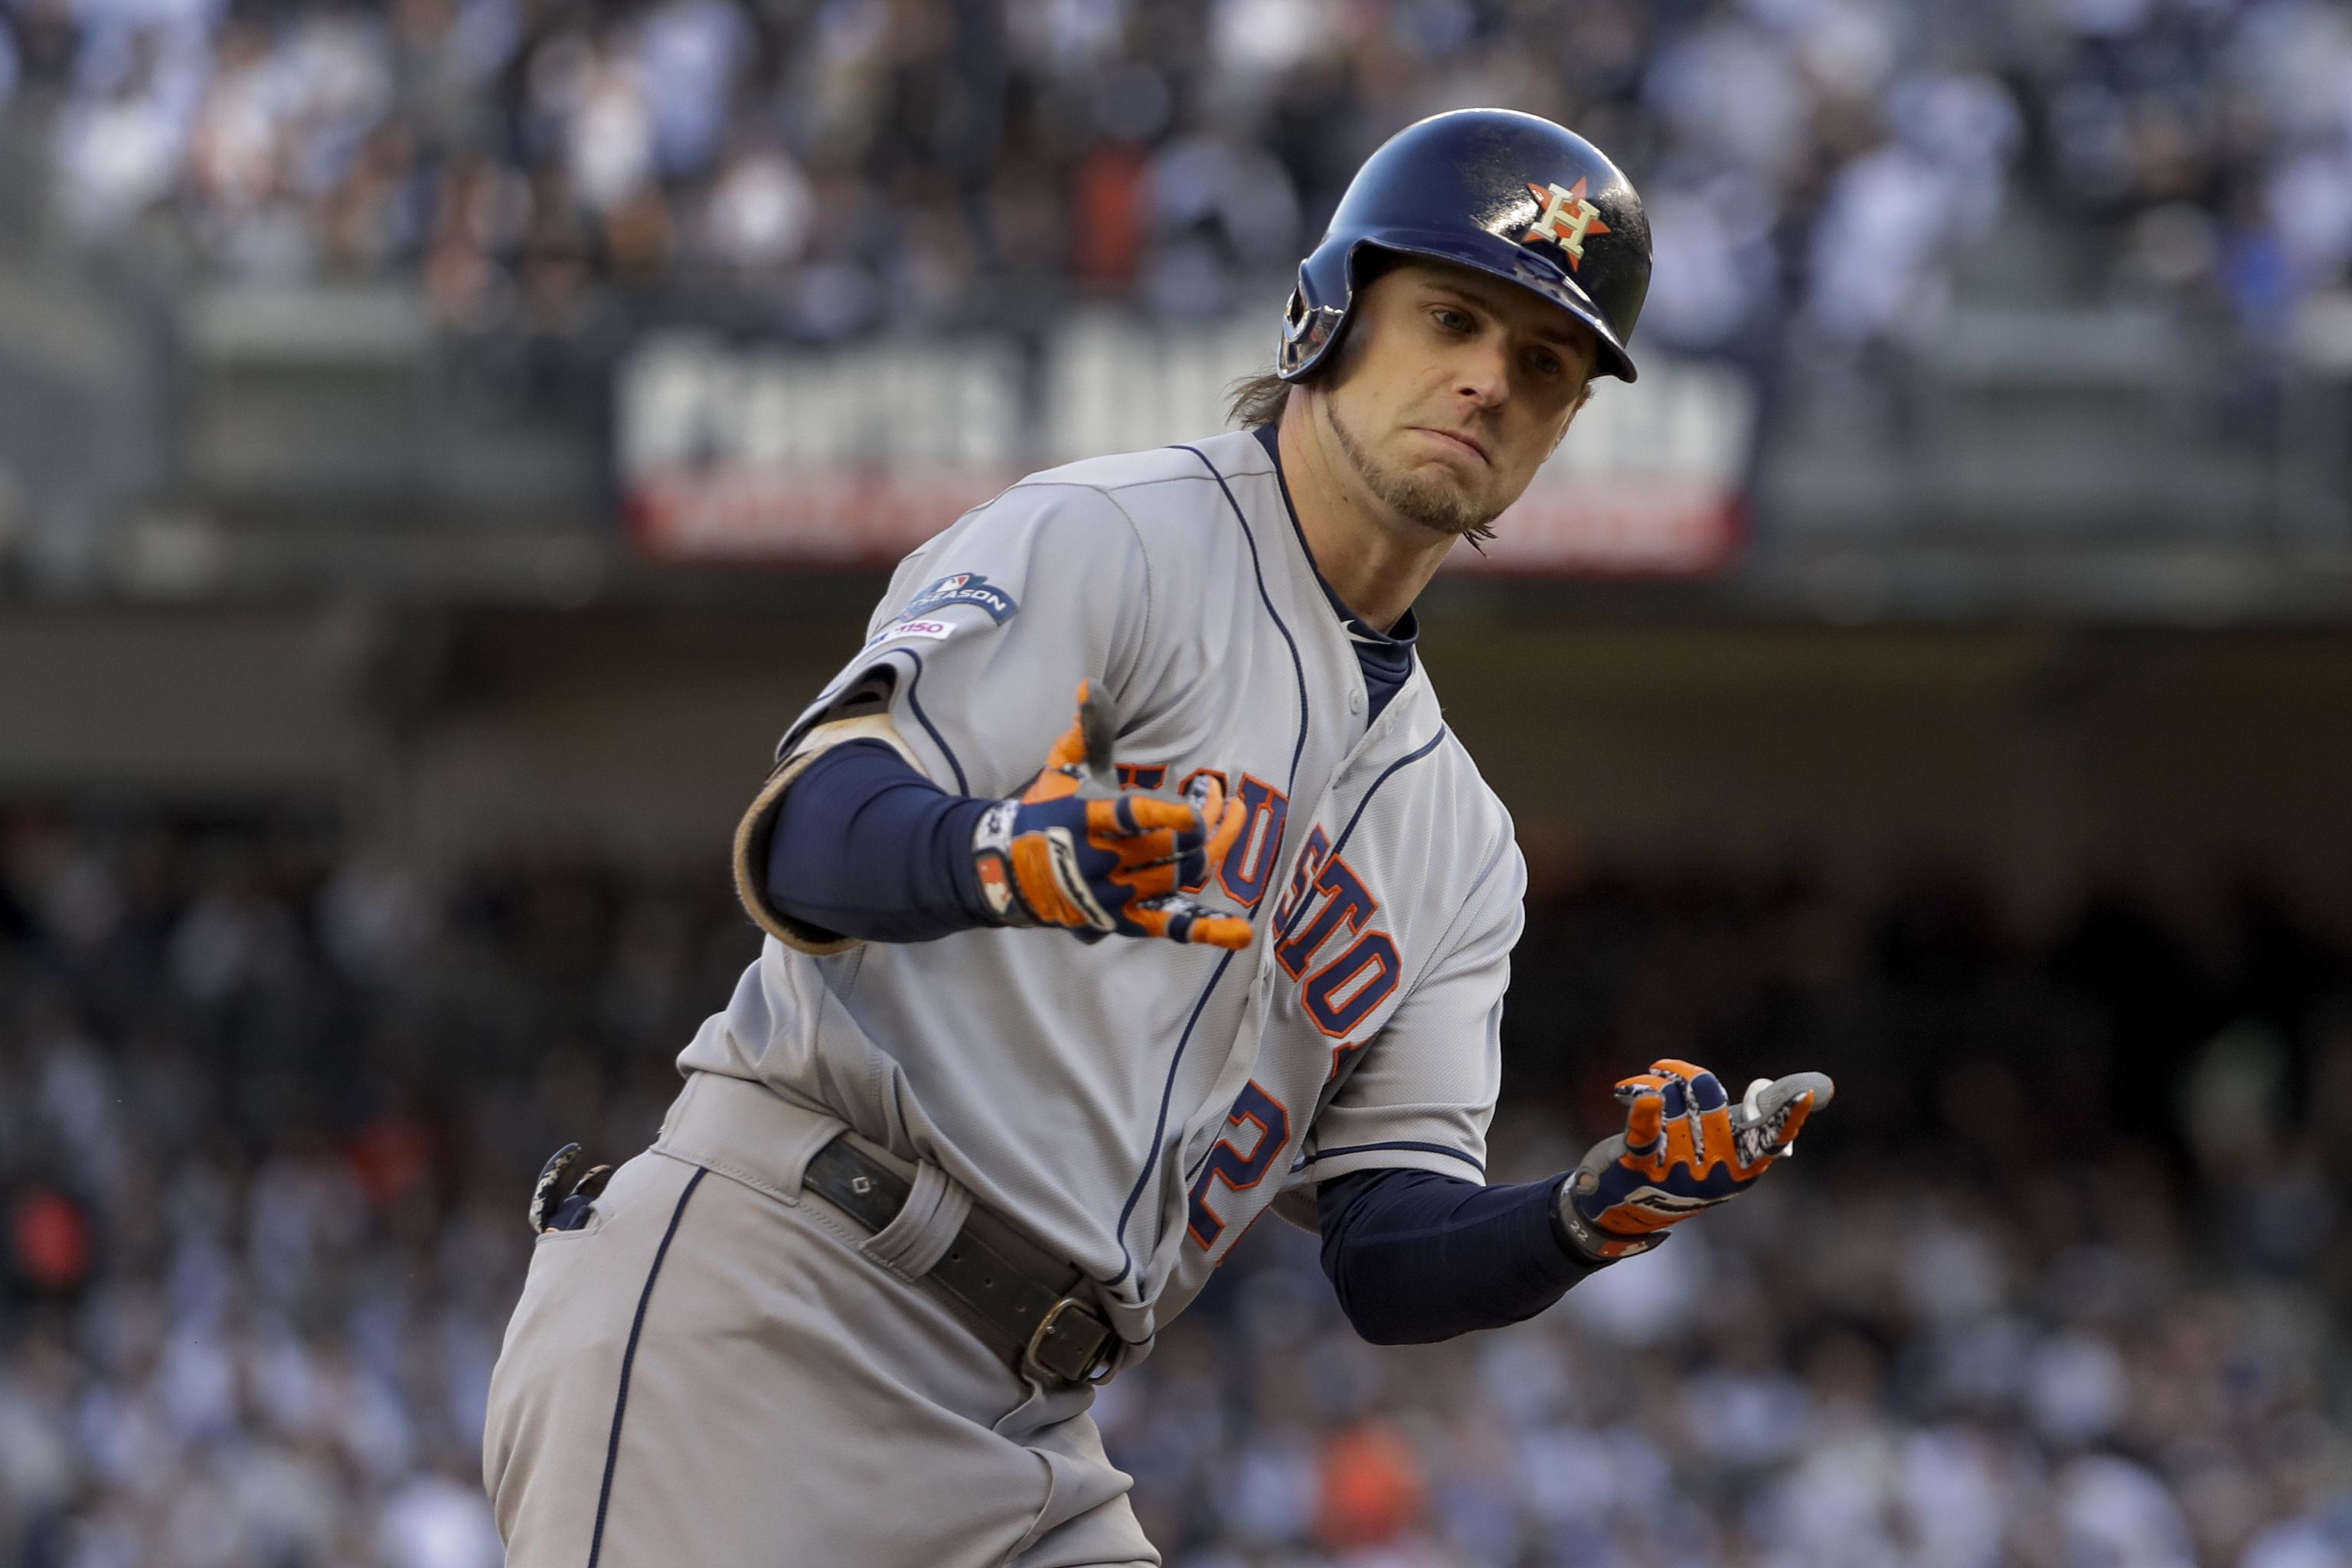 Josh Reddick addresses cheating accusations, Astros sign-stealing